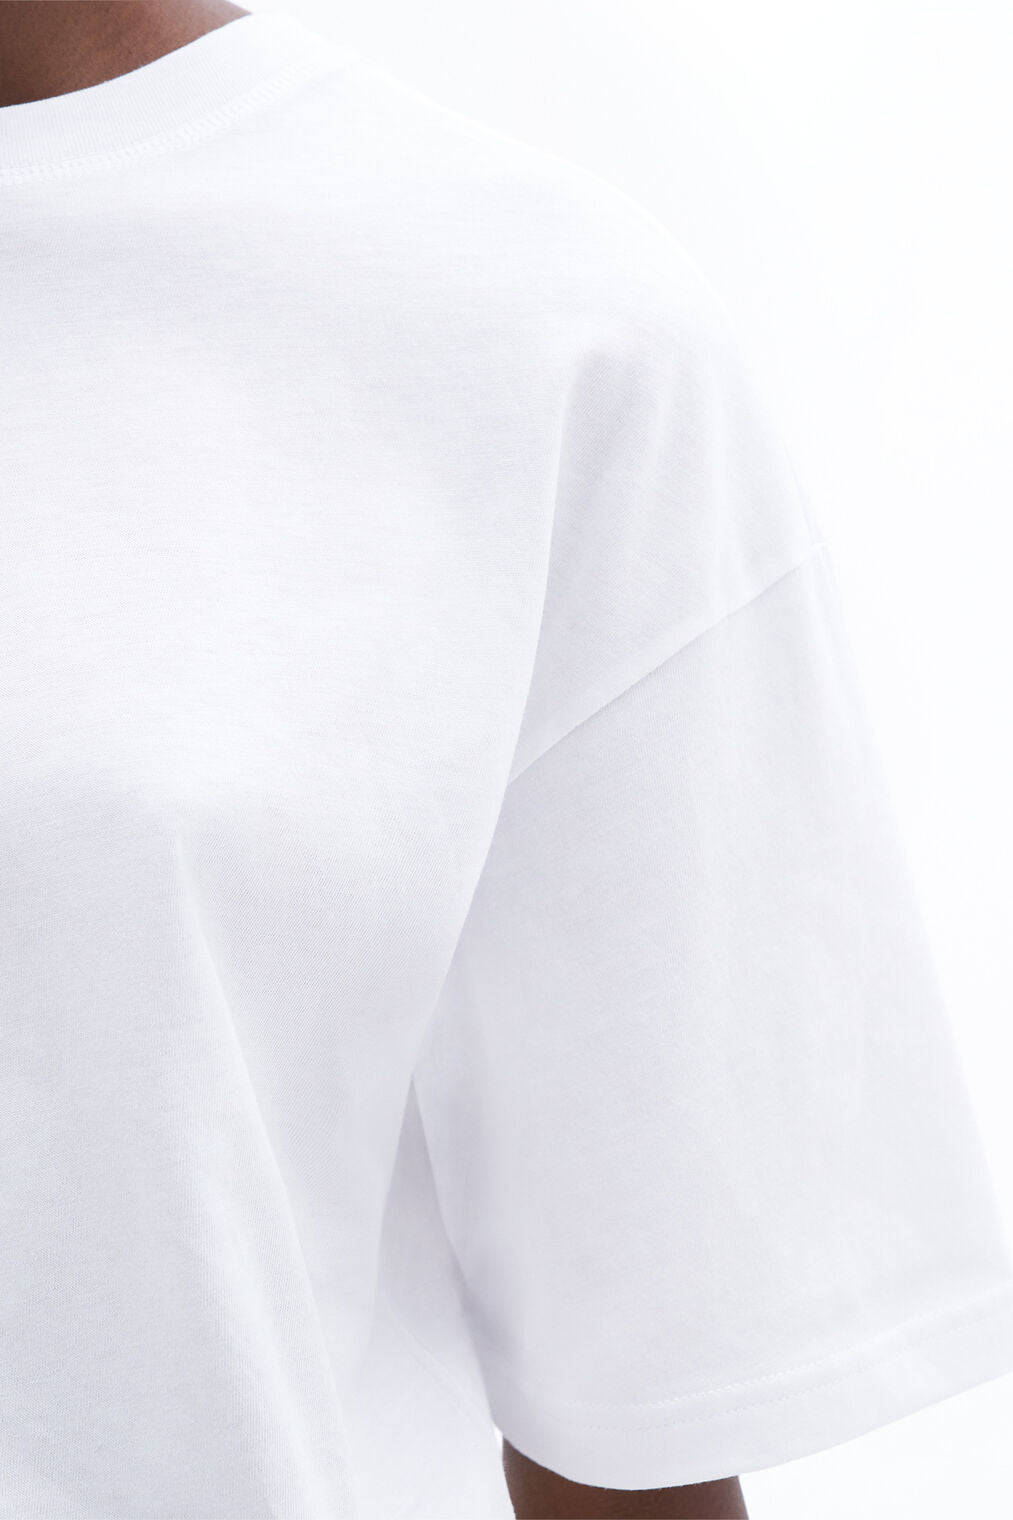 Loose fit tee in white